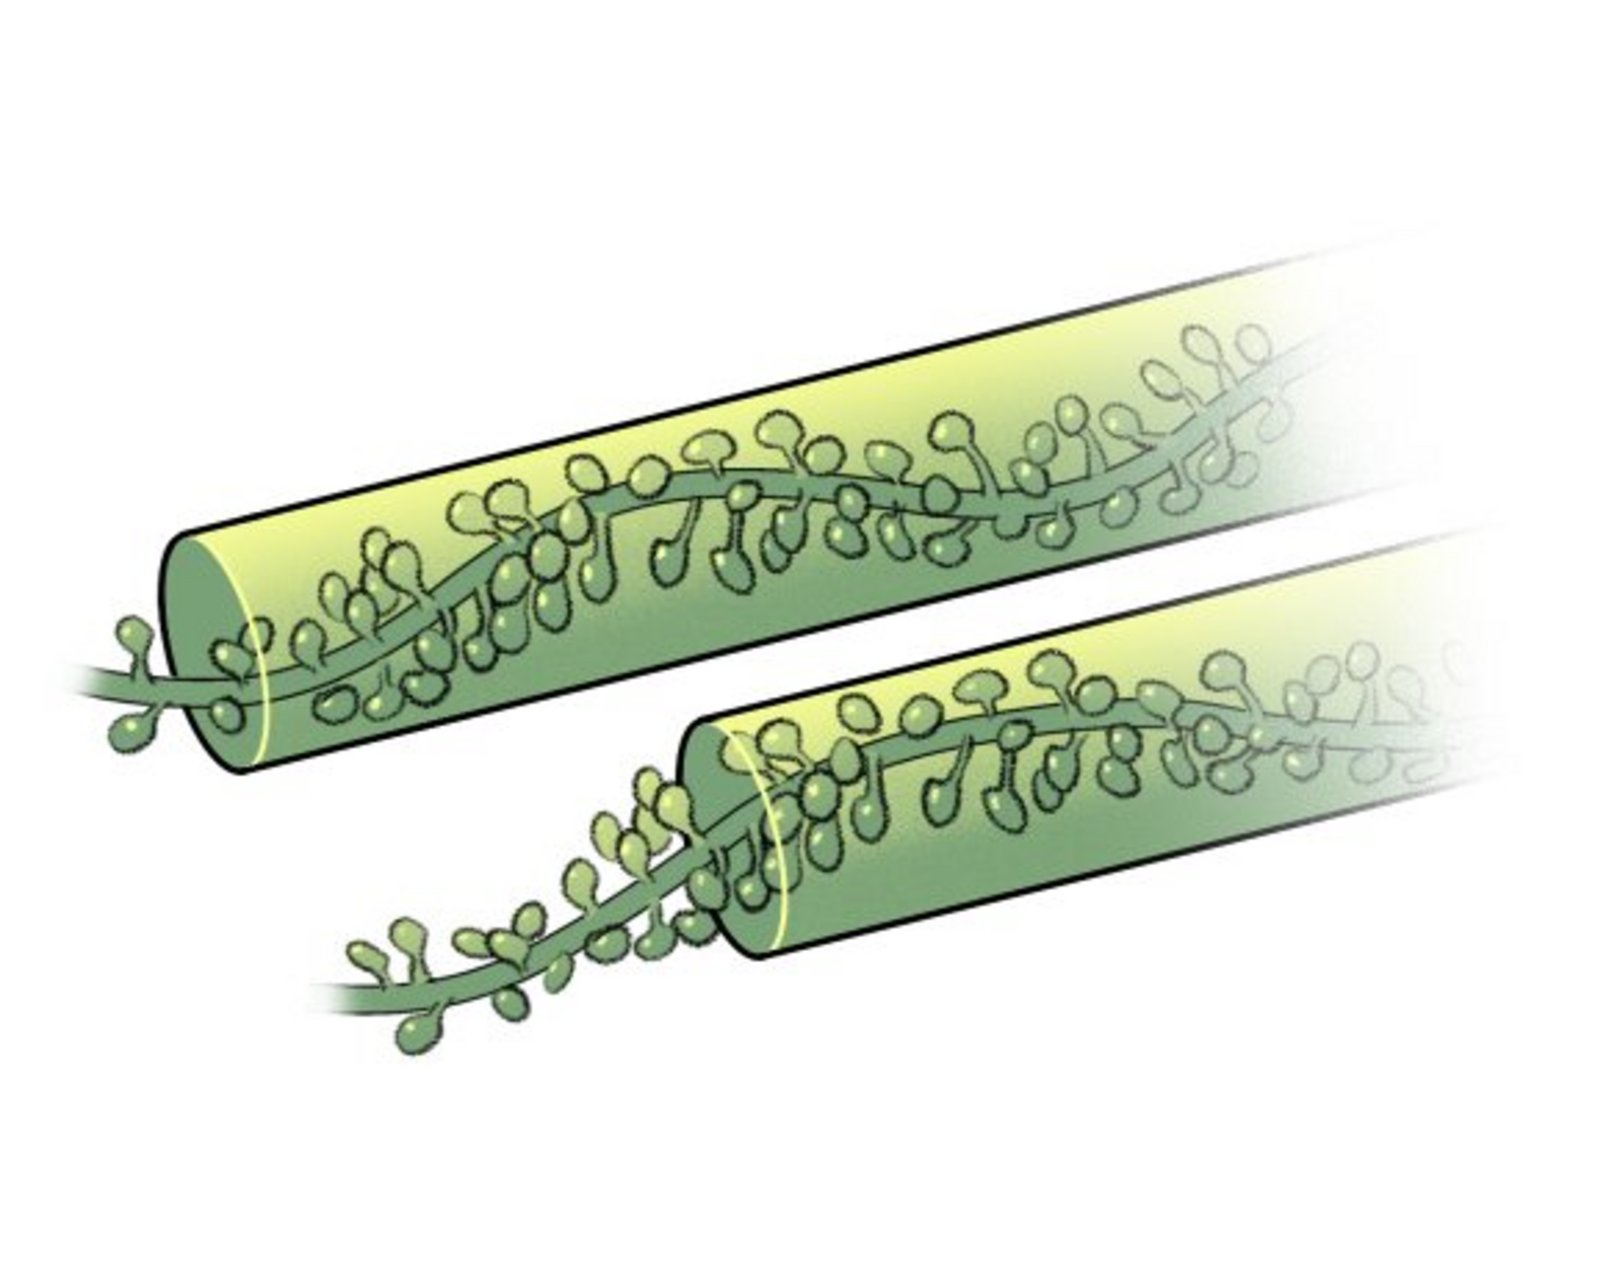 Illustration of algae protruding from pistons on a white background.